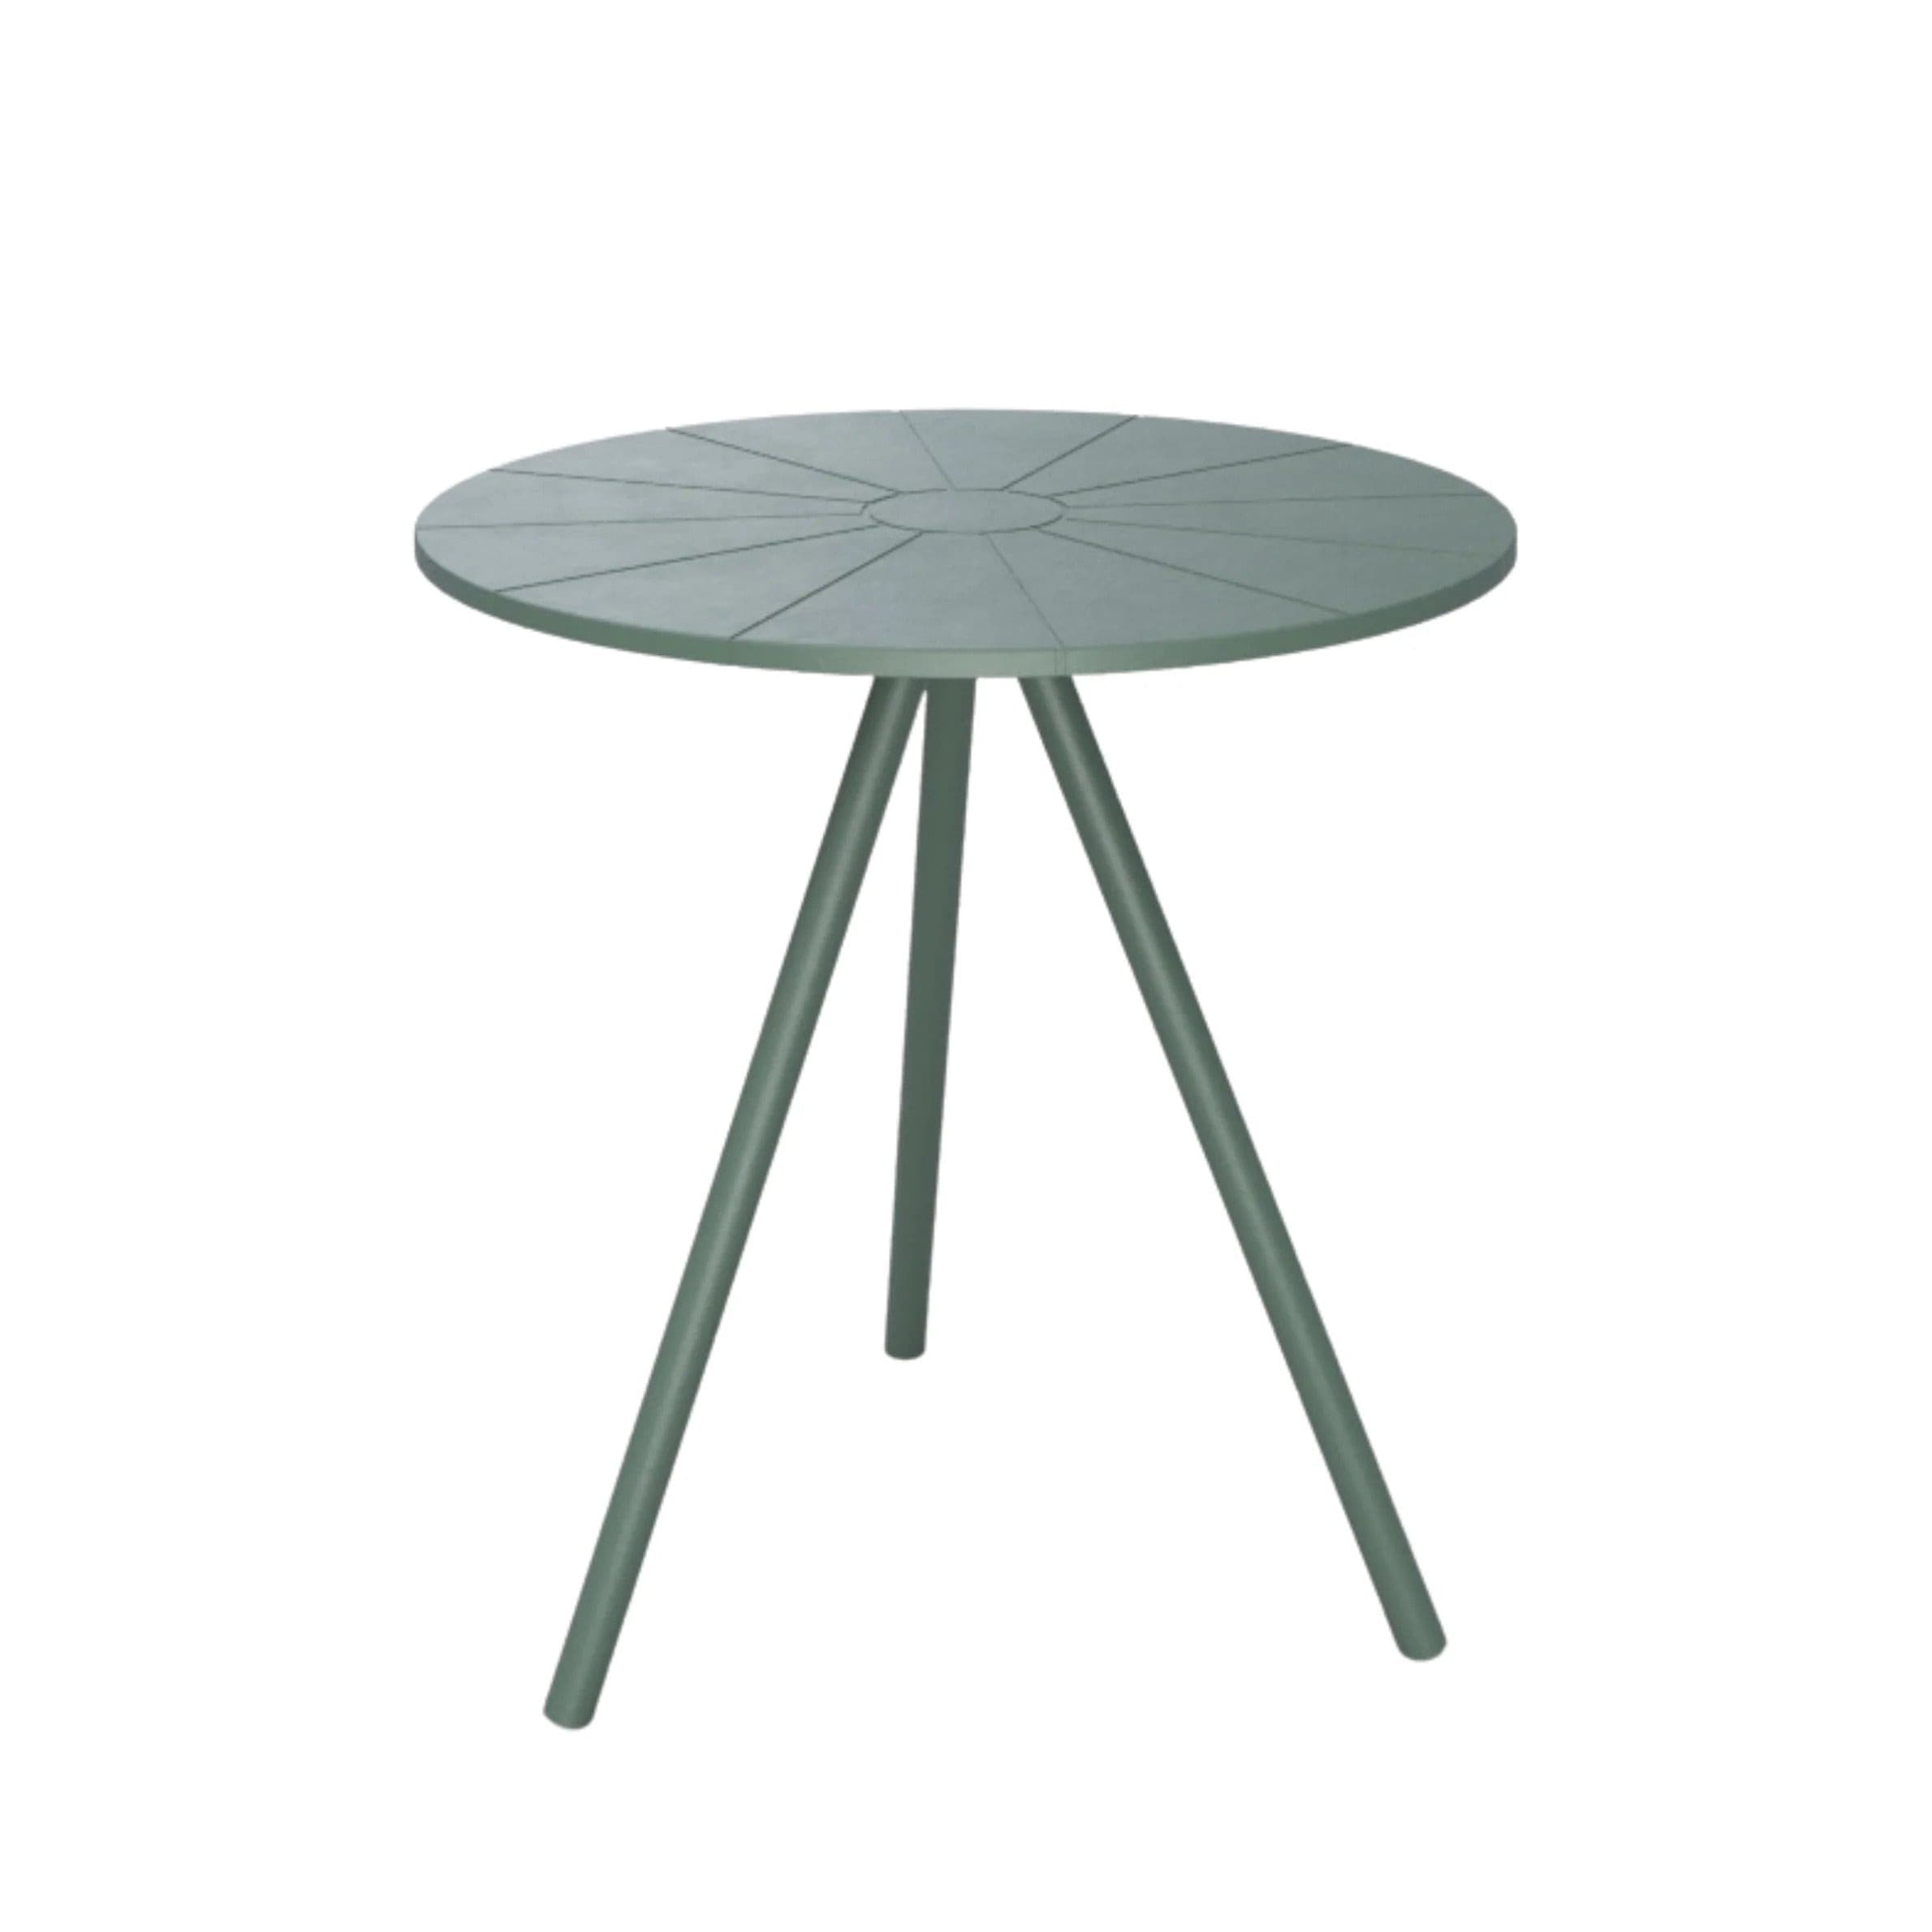 Nami Outdoor Small Dining Table (Olive Green).